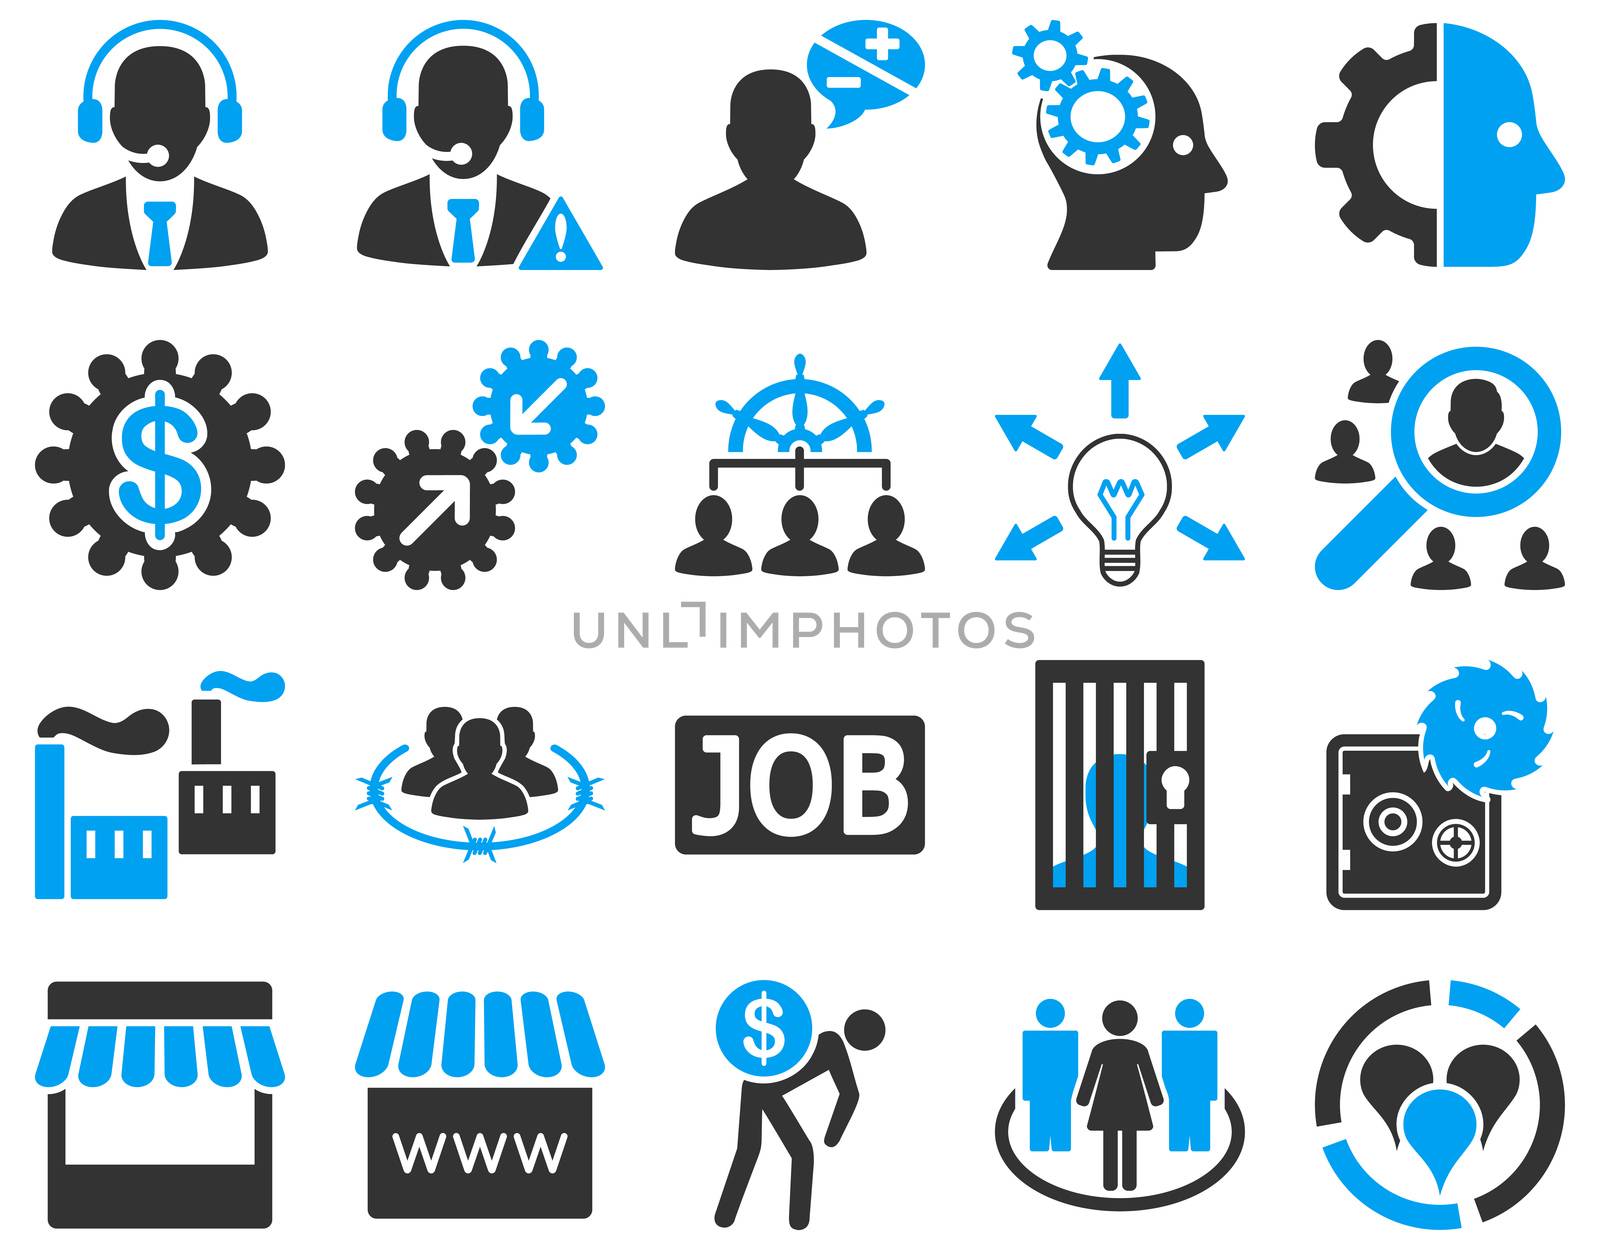 Business, service, management icons. These flat bicolor symbols use modern corporate light blue and gray colors. Images are isolated on a white background. Angles are rounded.